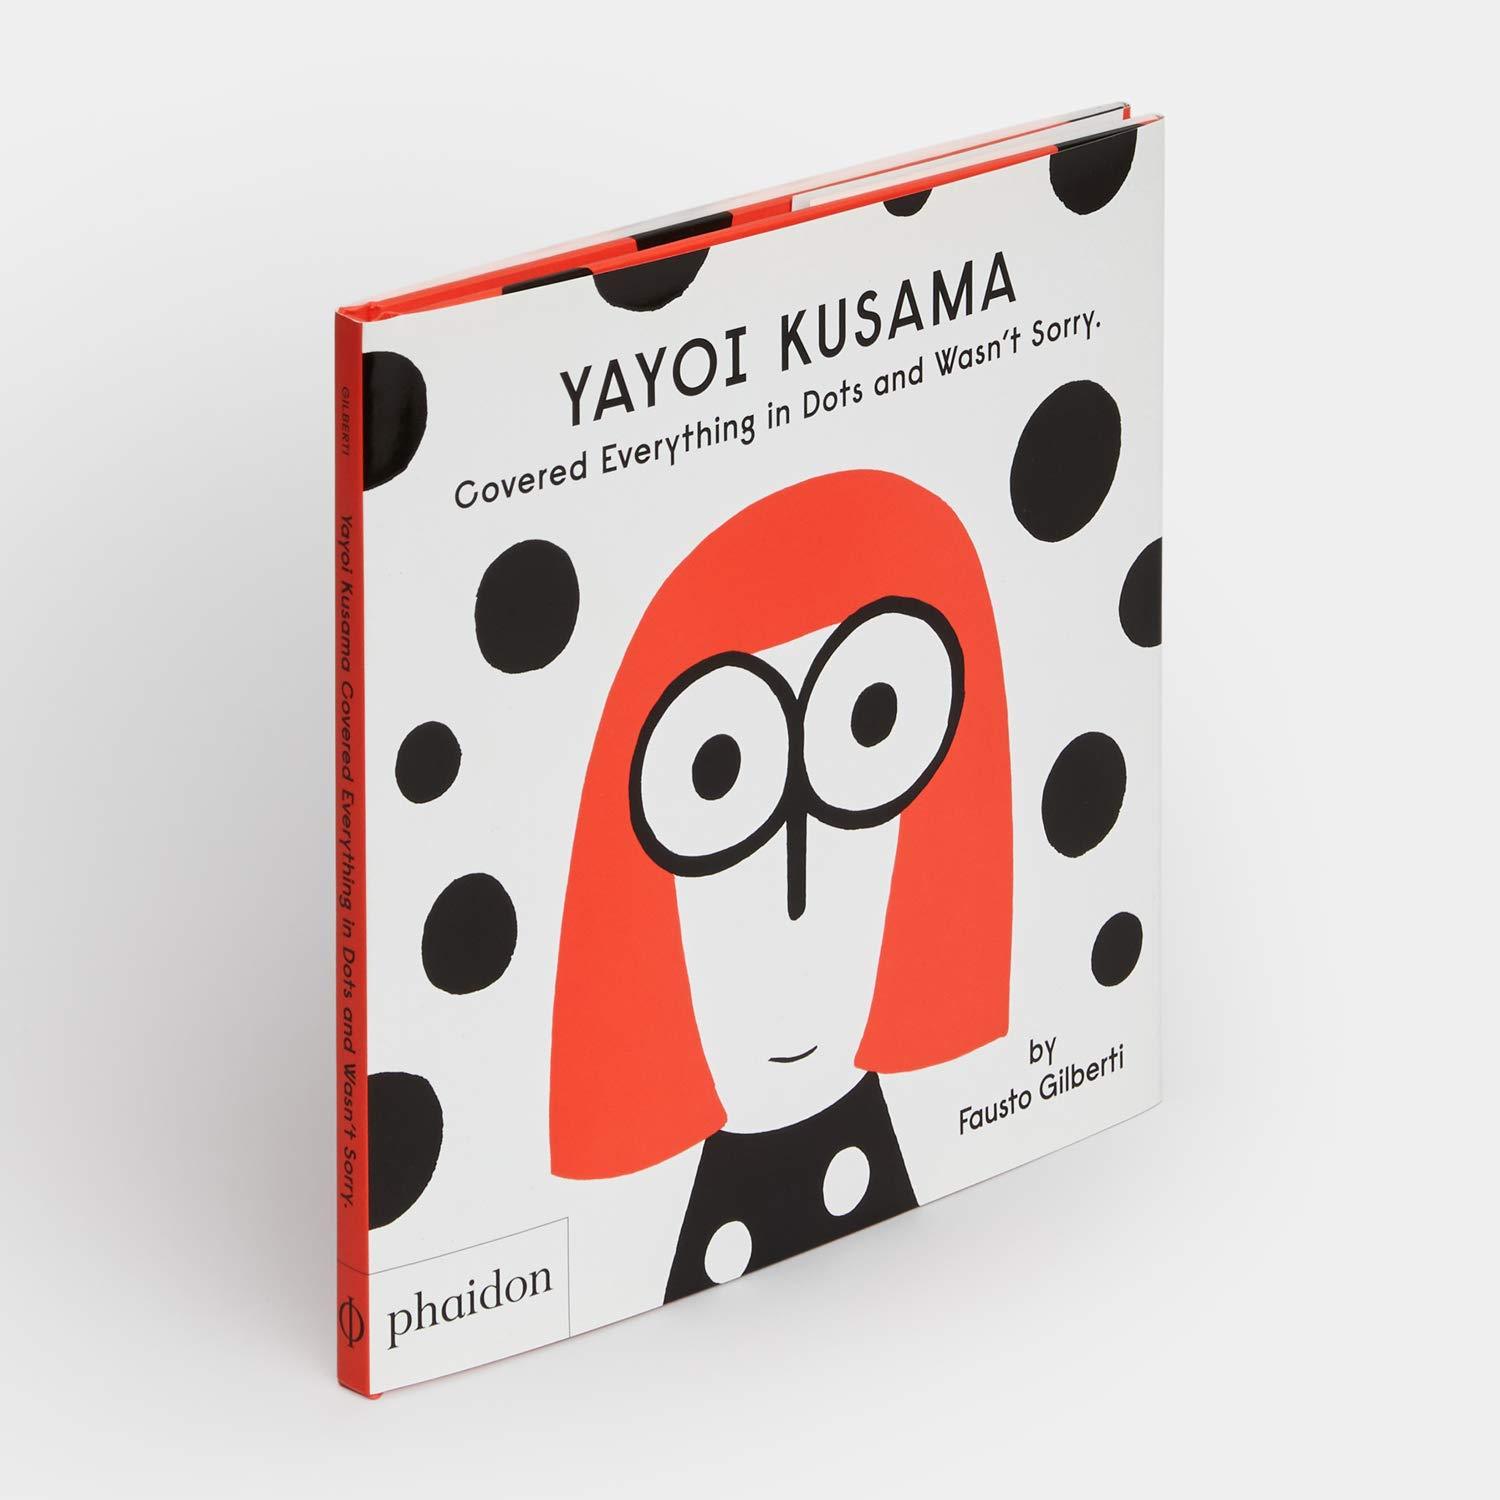 Yayoi Kusama Covered Everything in Dots and Wasn't Sorry Make and Wonder 